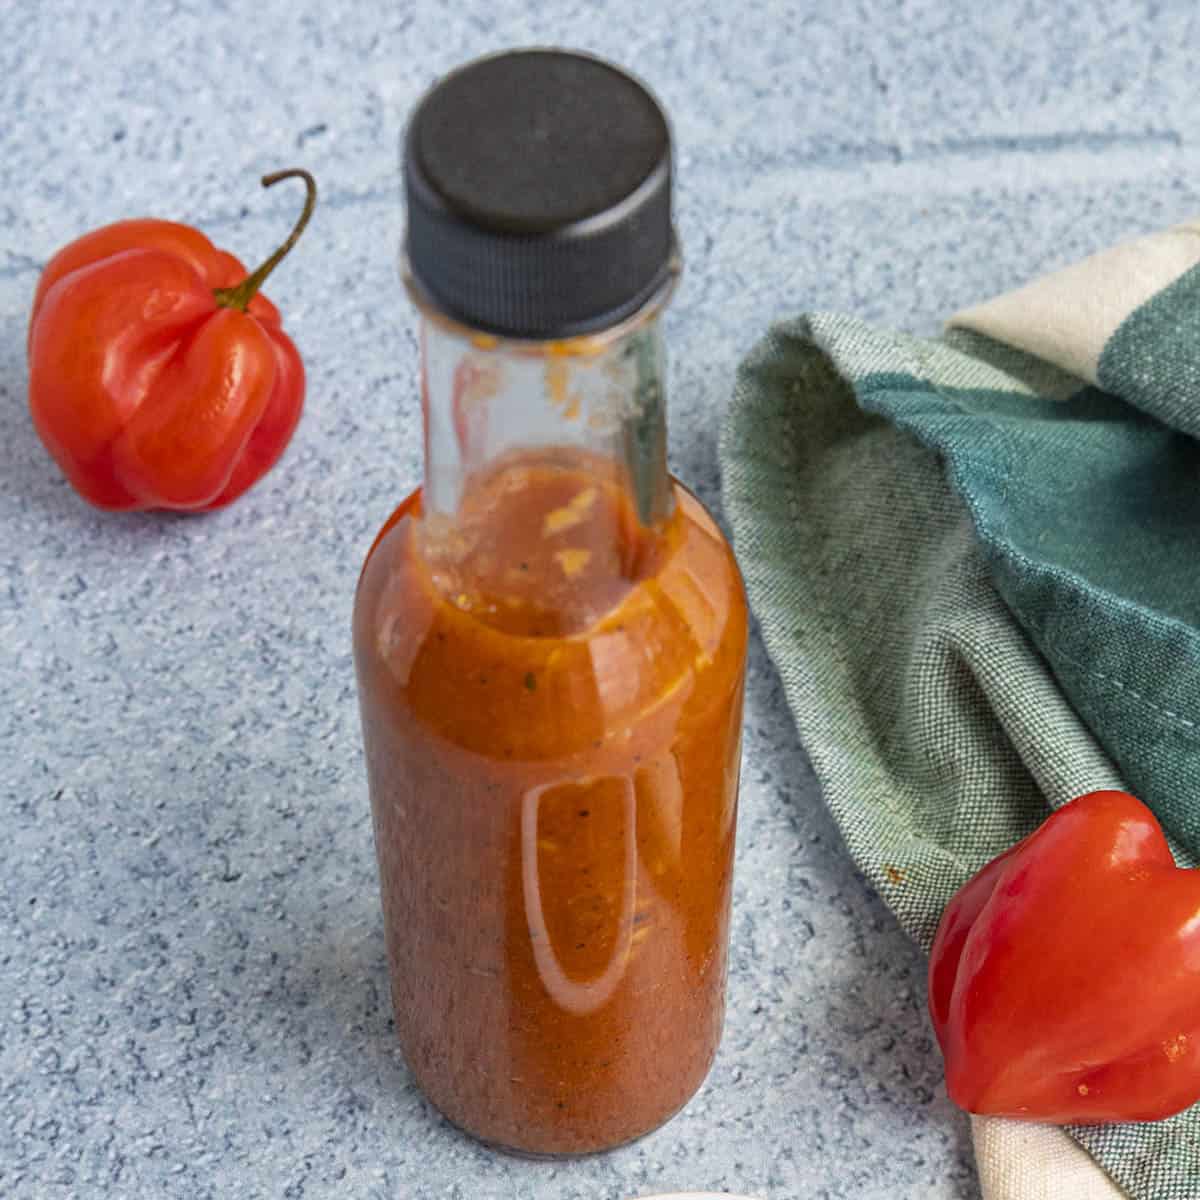 Homemade Hot Sauce - Craving Home Cooked